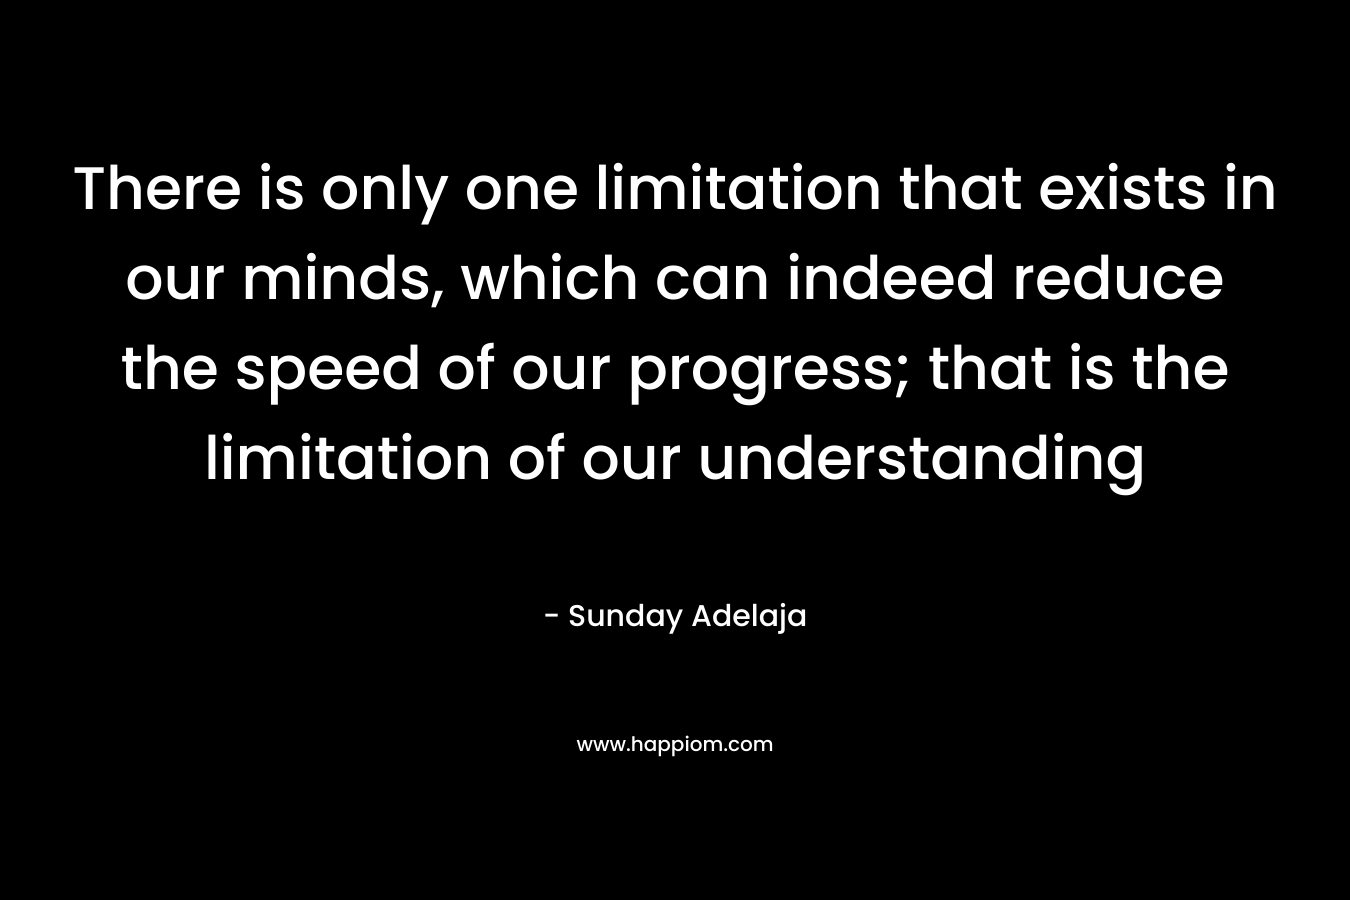 There is only one limitation that exists in our minds, which can indeed reduce the speed of our progress; that is the limitation of our understanding